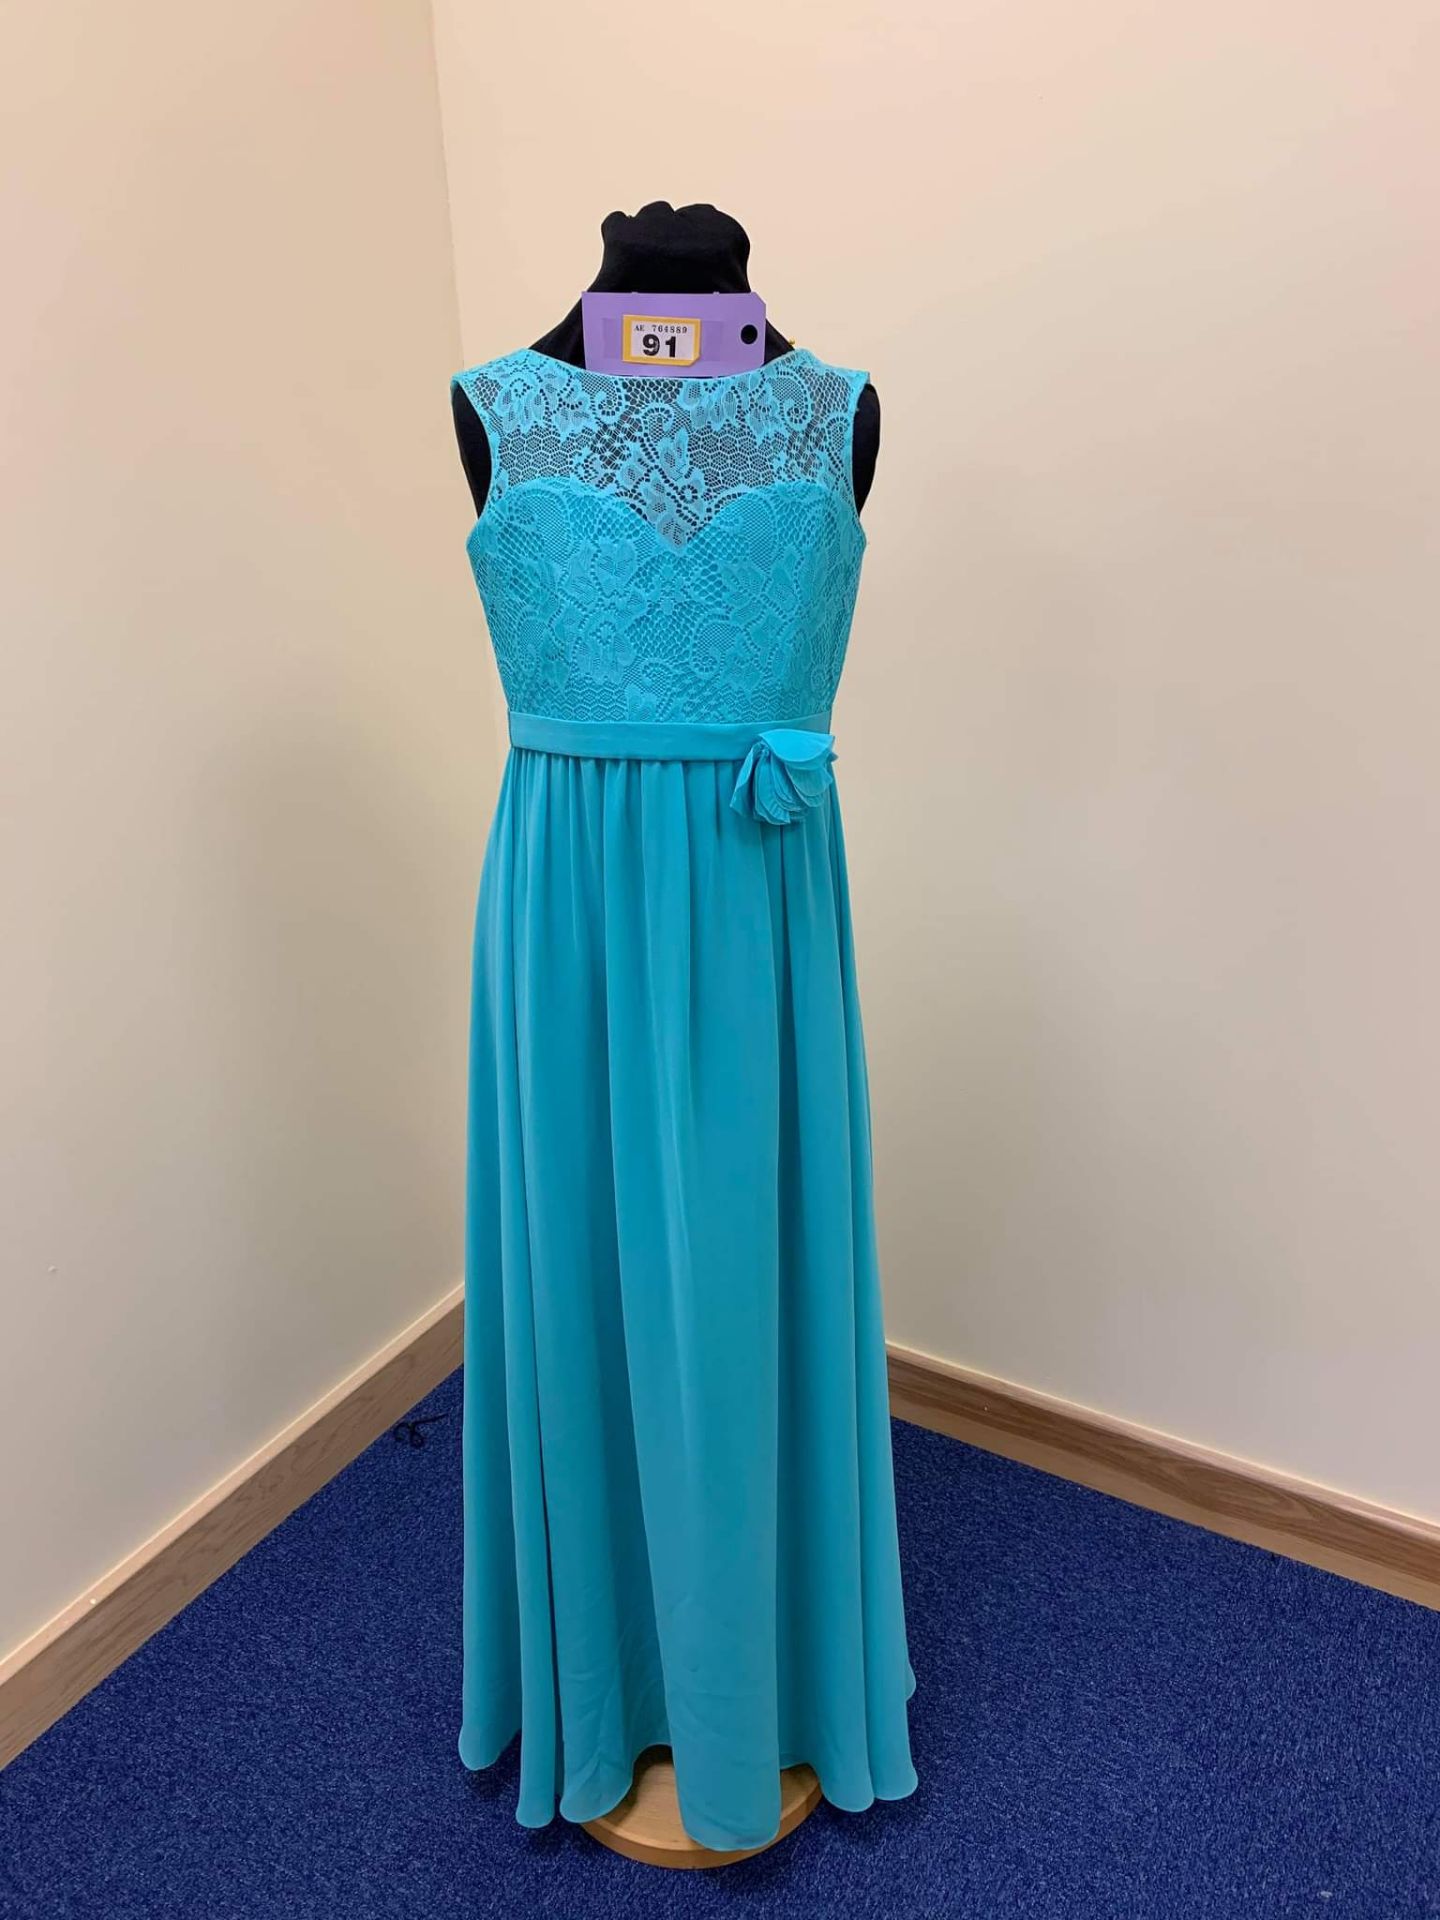 Tiffany Blue Lace Top Dress Age 9 - Image 2 of 10